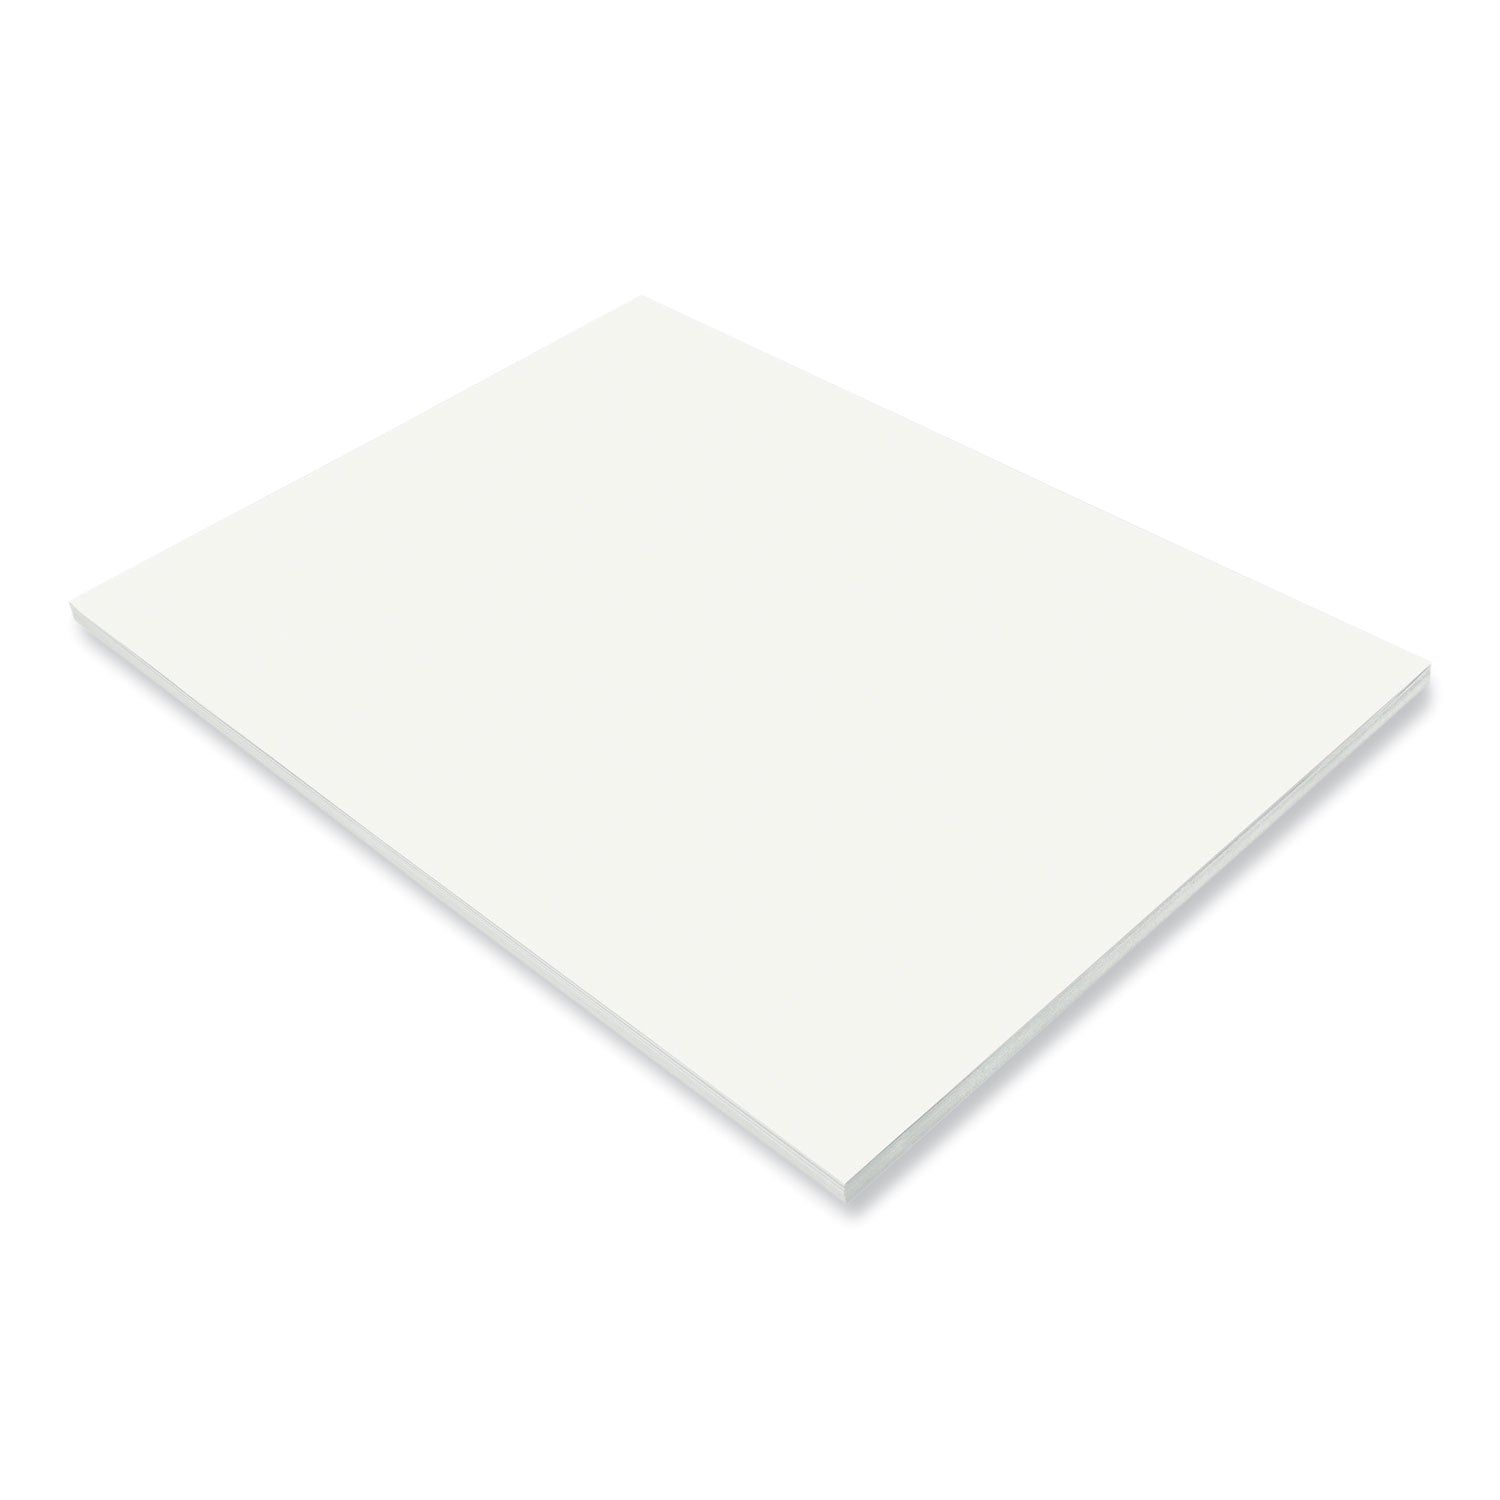 SunWorks Construction Paper, 50 lb Text Weight, 18 x 24, White, 50/Pack - 